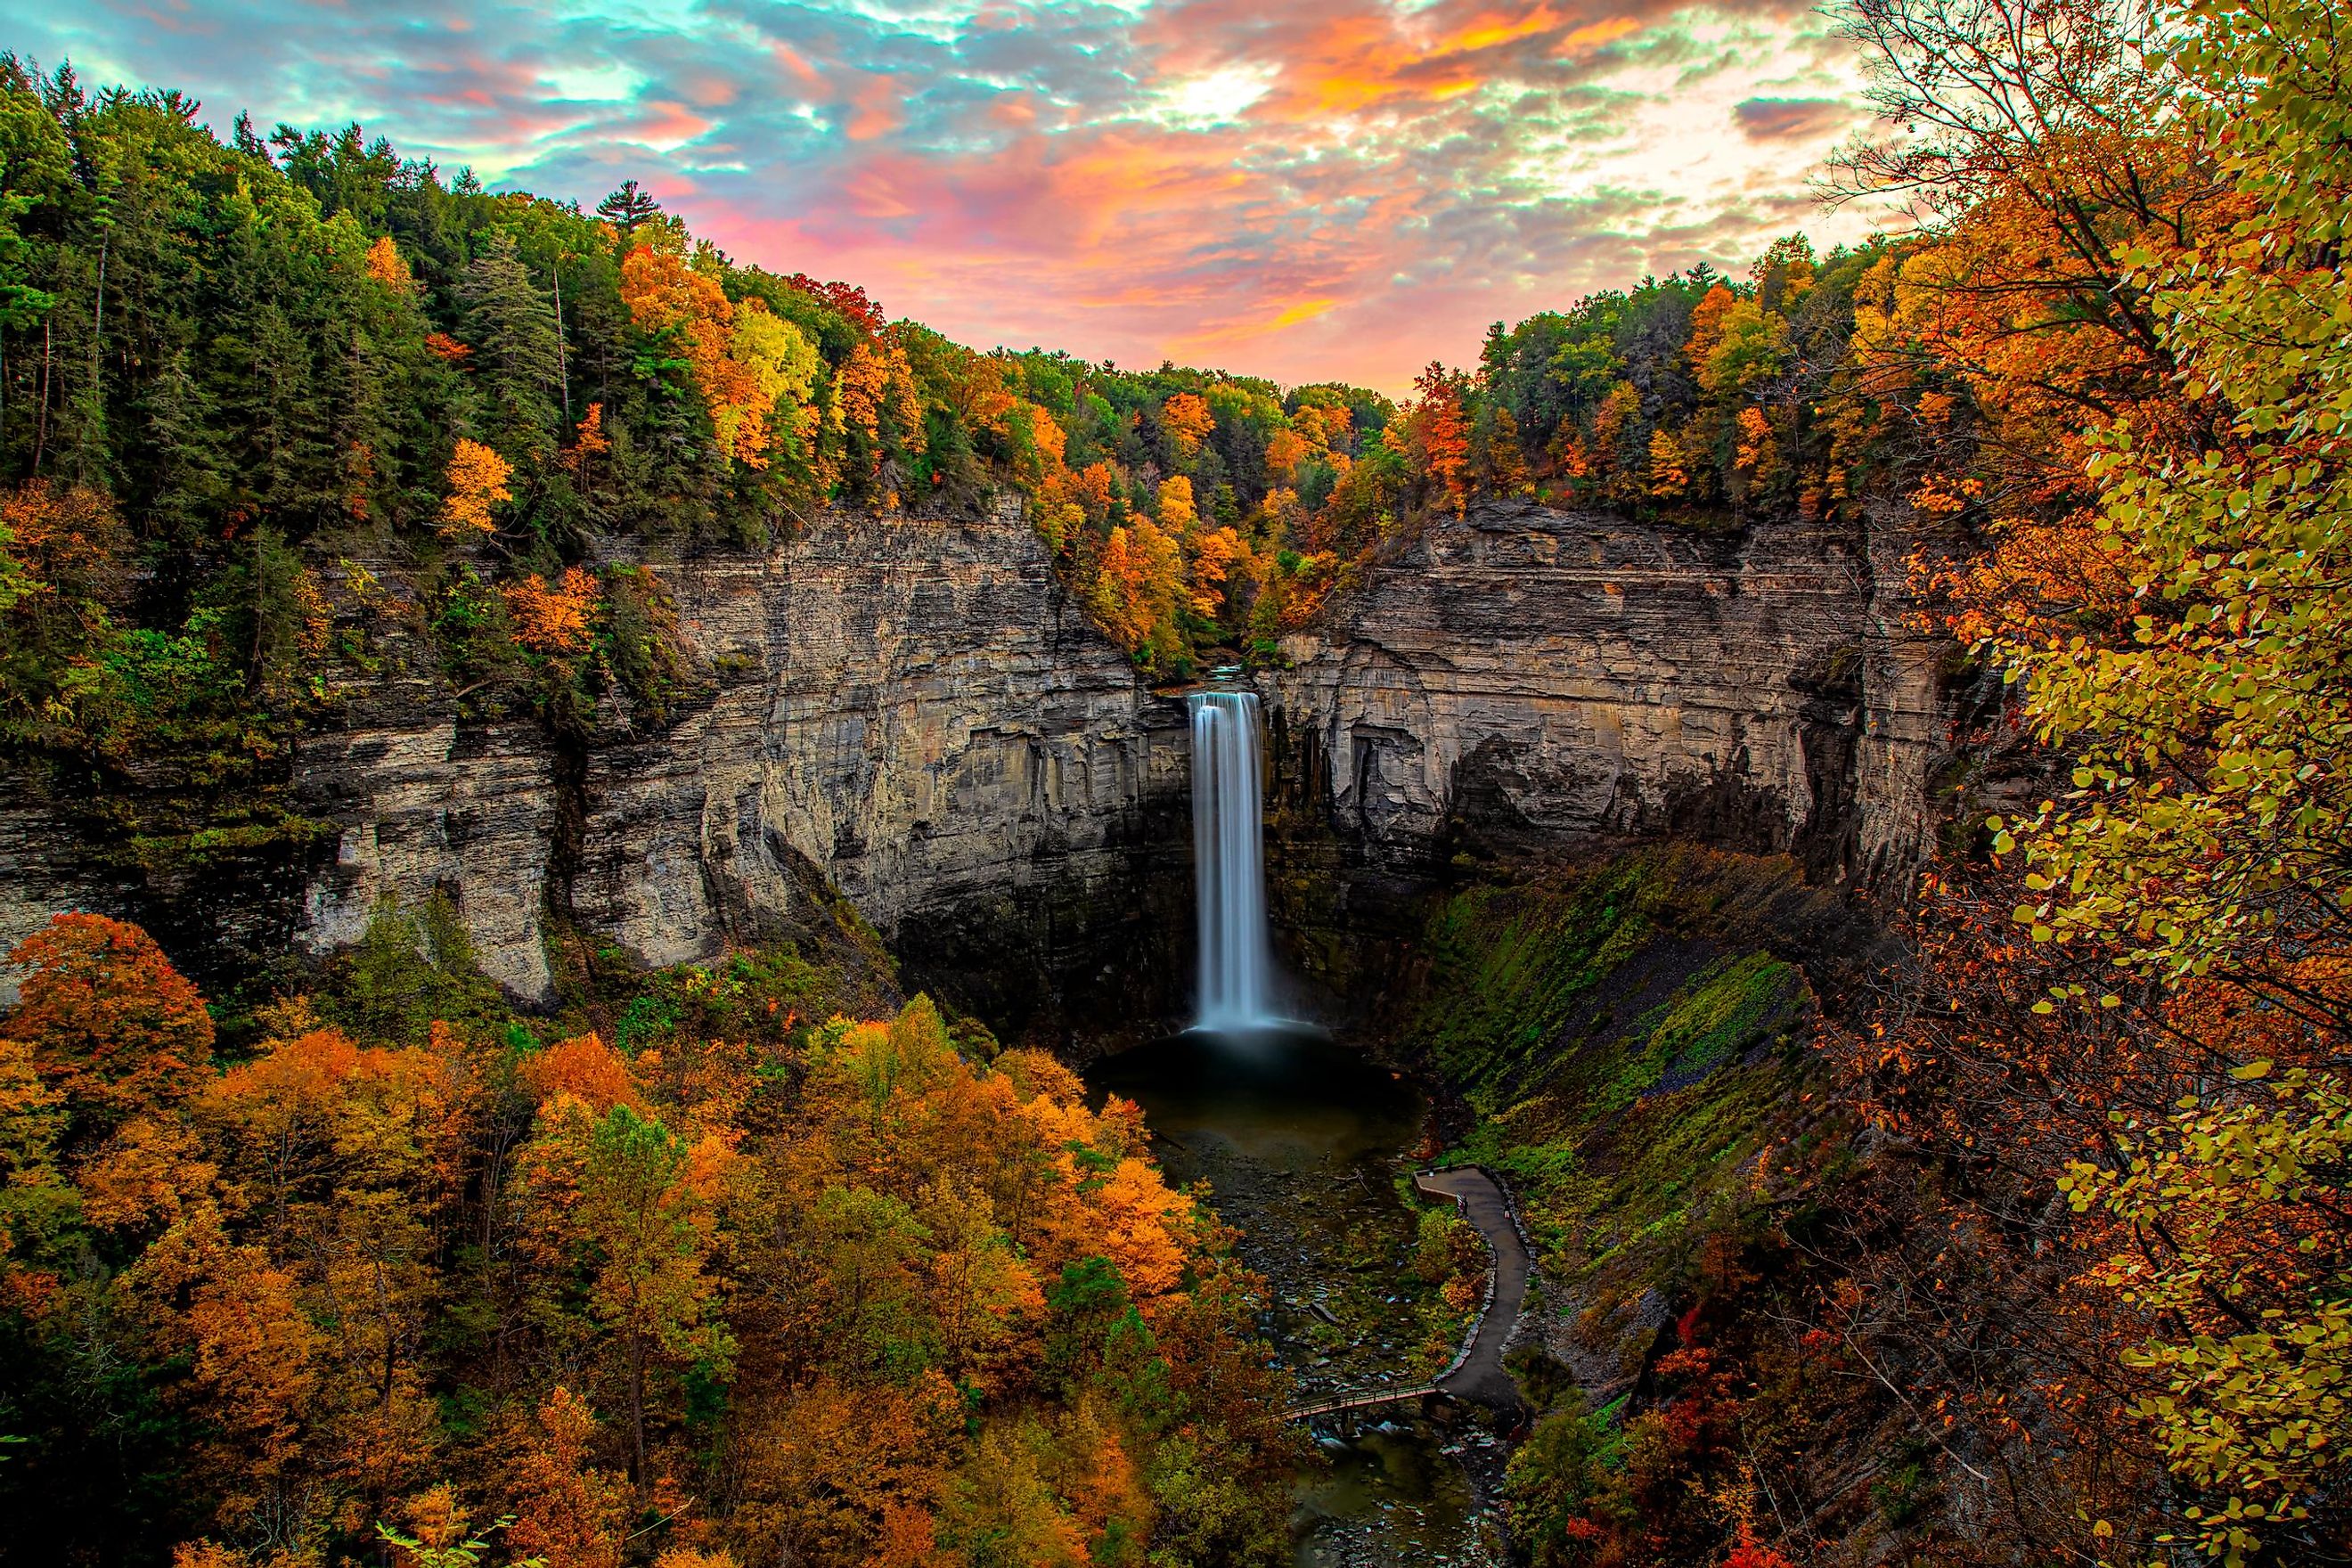 Sunset at Taughannock Falls amidst full fall colors.